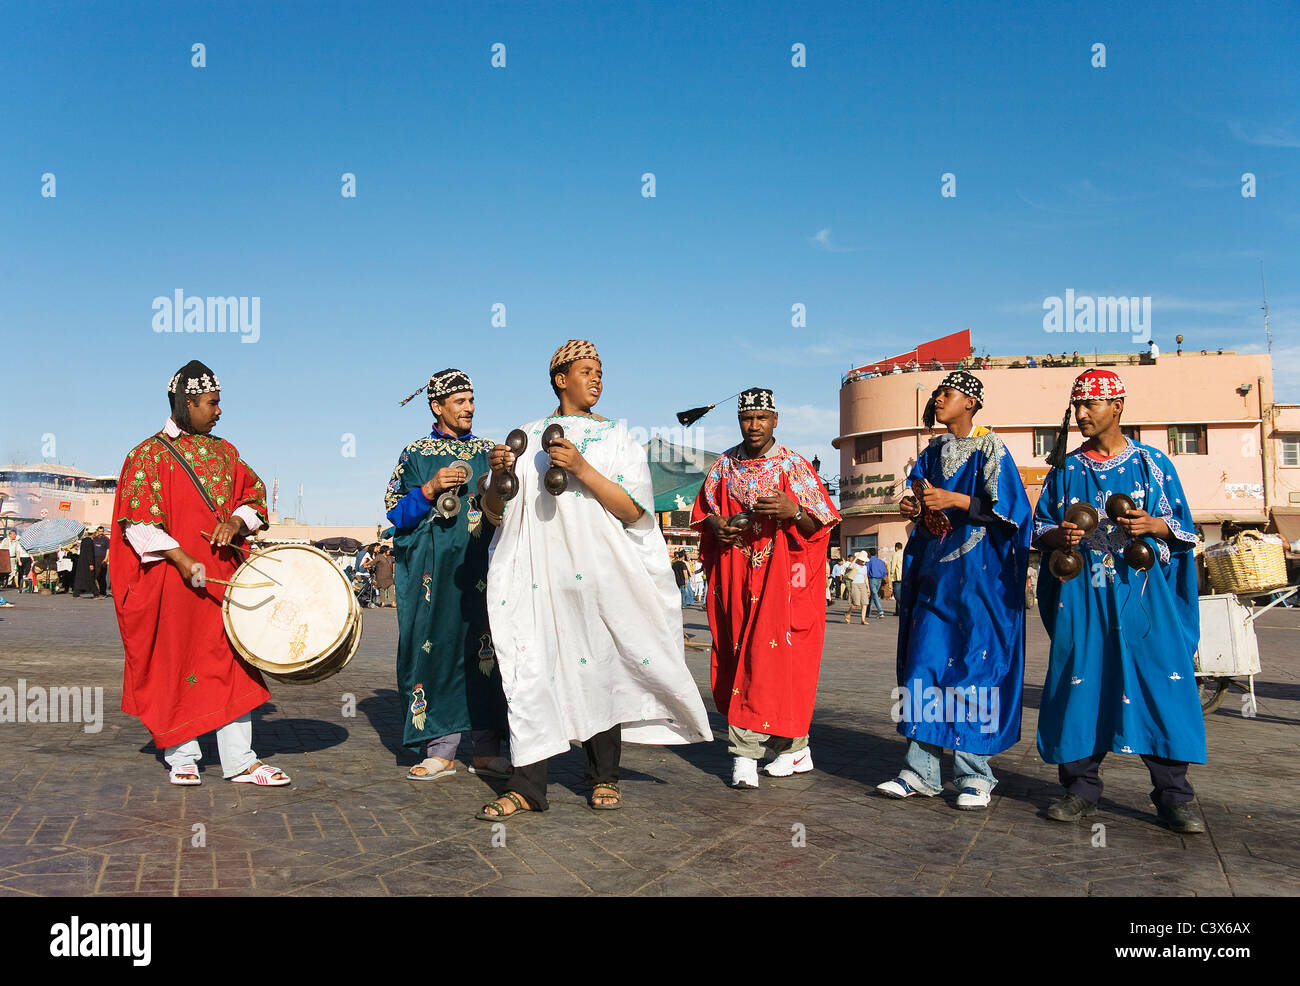 Musicians in traditional dress entertain both tourists and locals in the Djemaa el Fna market place. Marrakesh, Morocco. Stock Photo